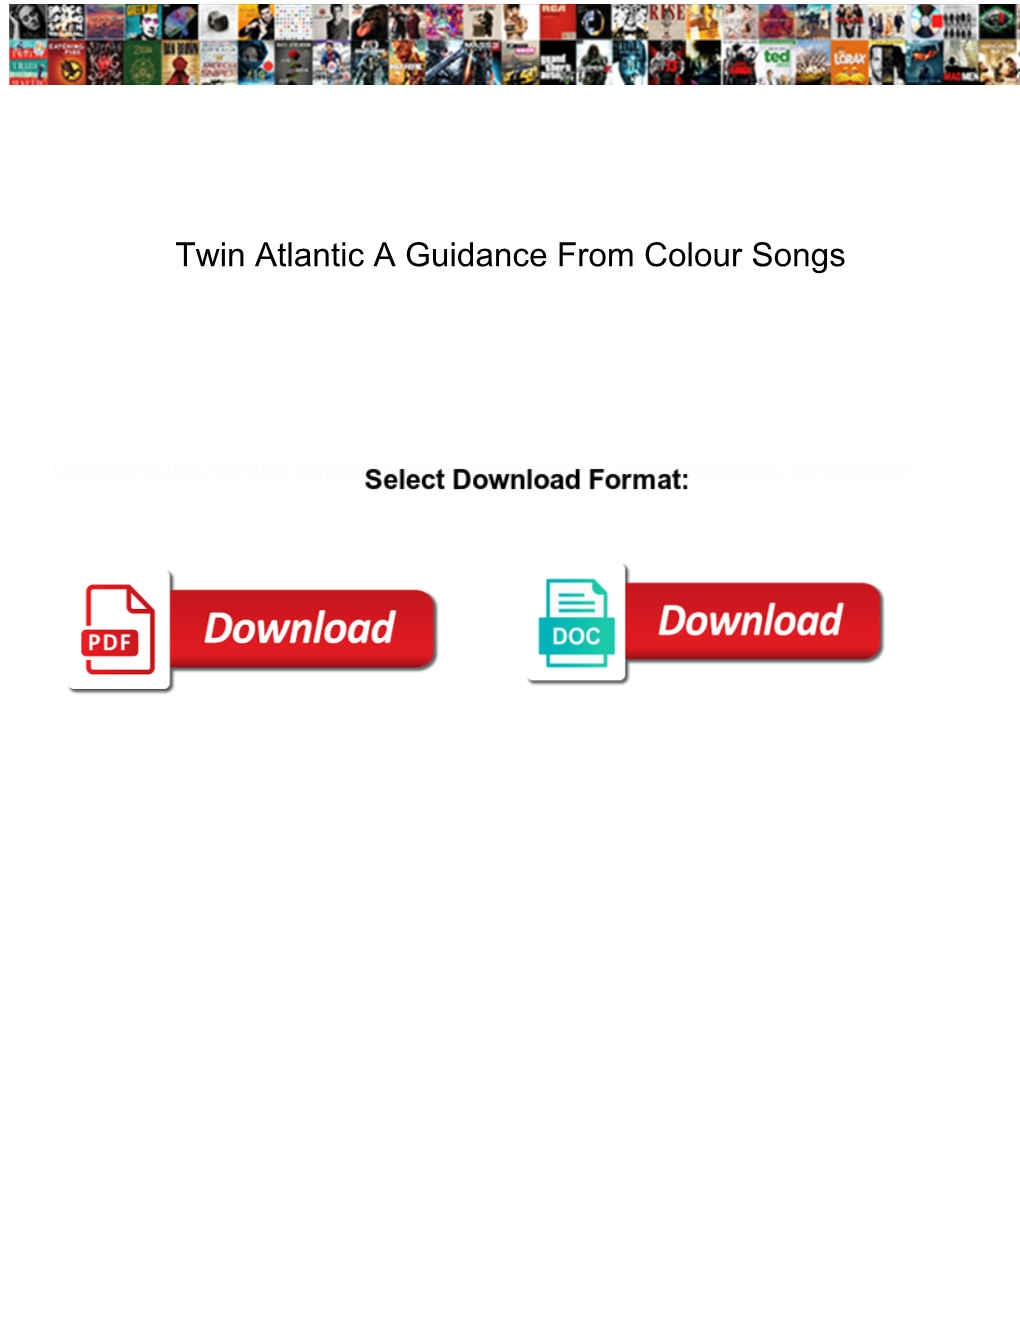 Twin Atlantic a Guidance from Colour Songs